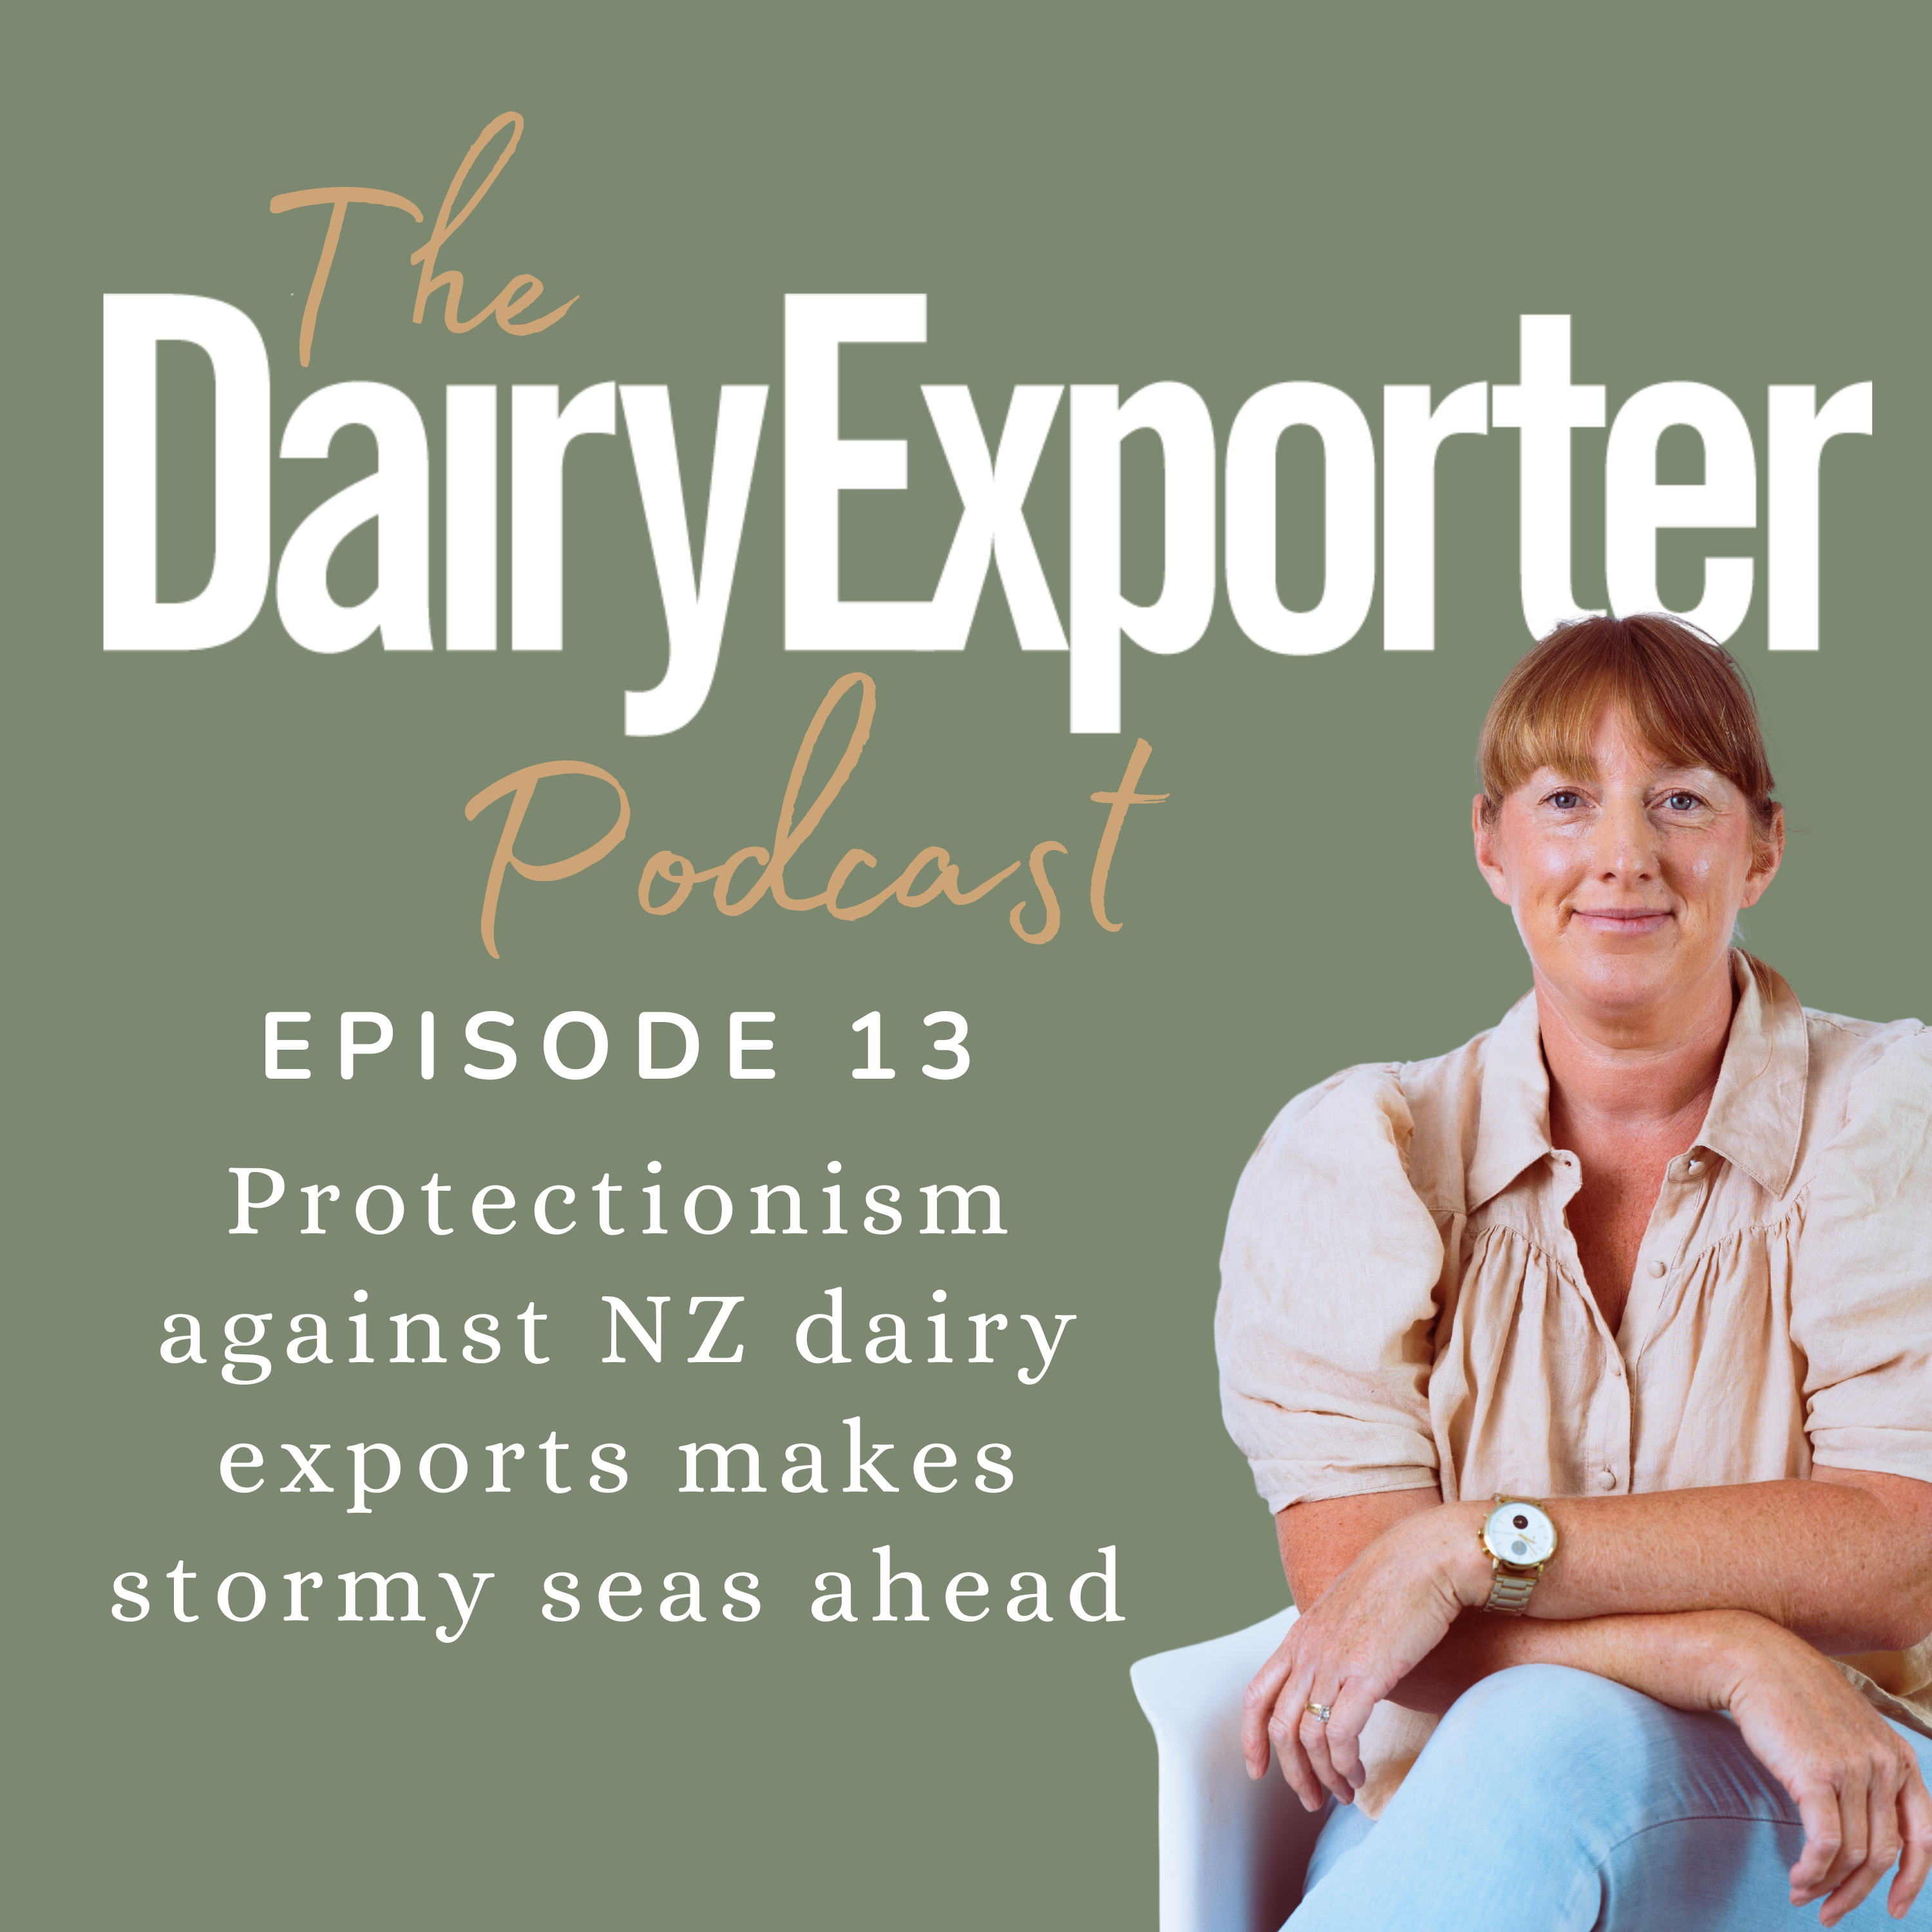 Episode 13 - Protectionism against NZ dairy exports makes stormy seas ahead